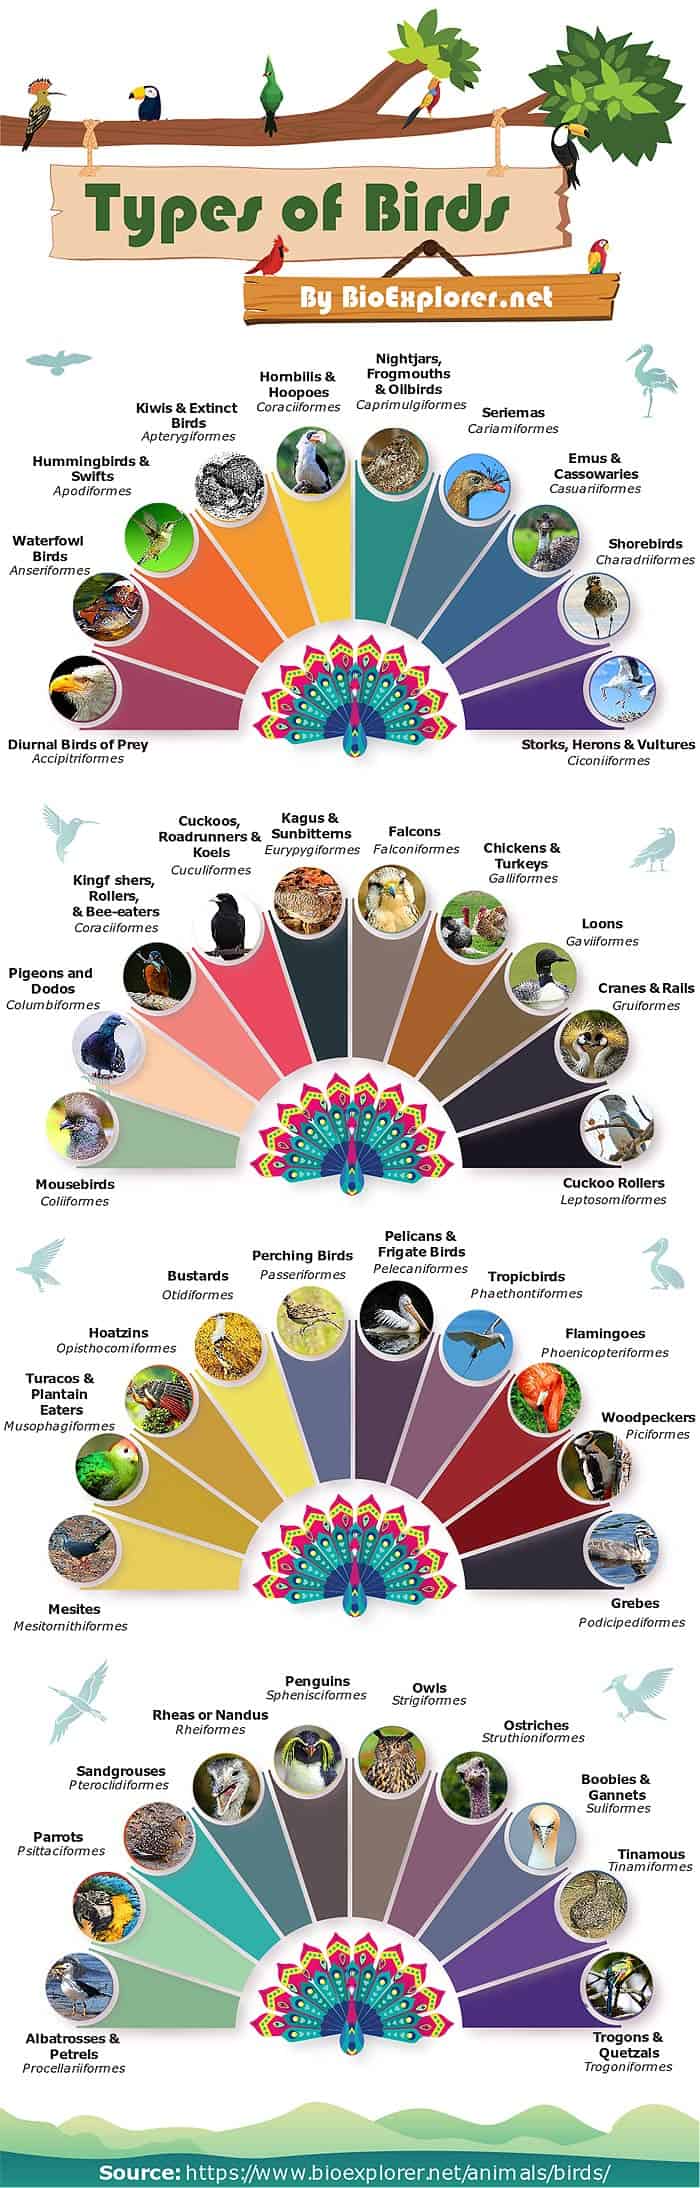 Types of Birds, 40 Different Kinds of Birds